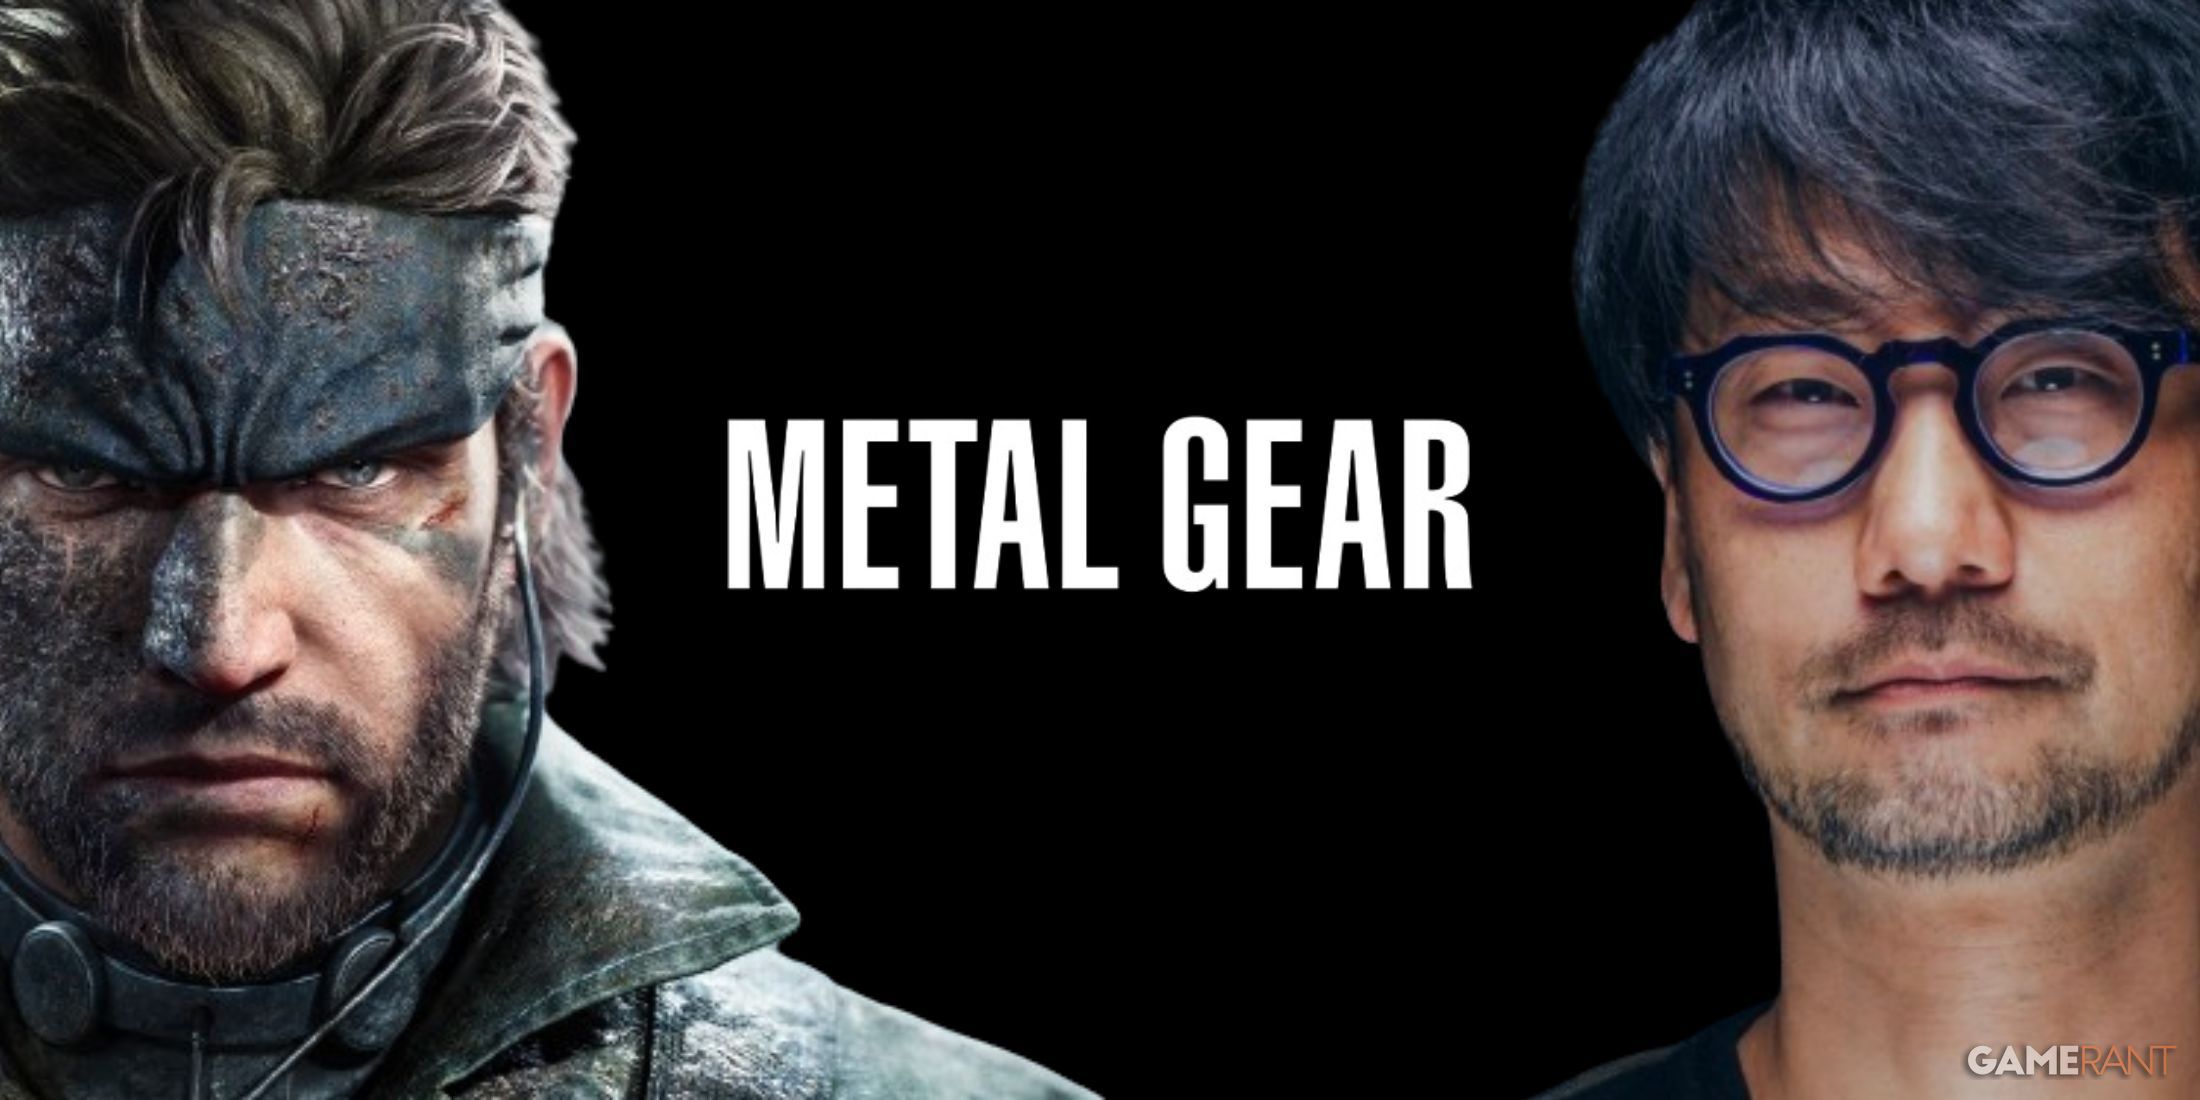 Metal Gear series producer mentions Hideo Kojima in an official Konami video.